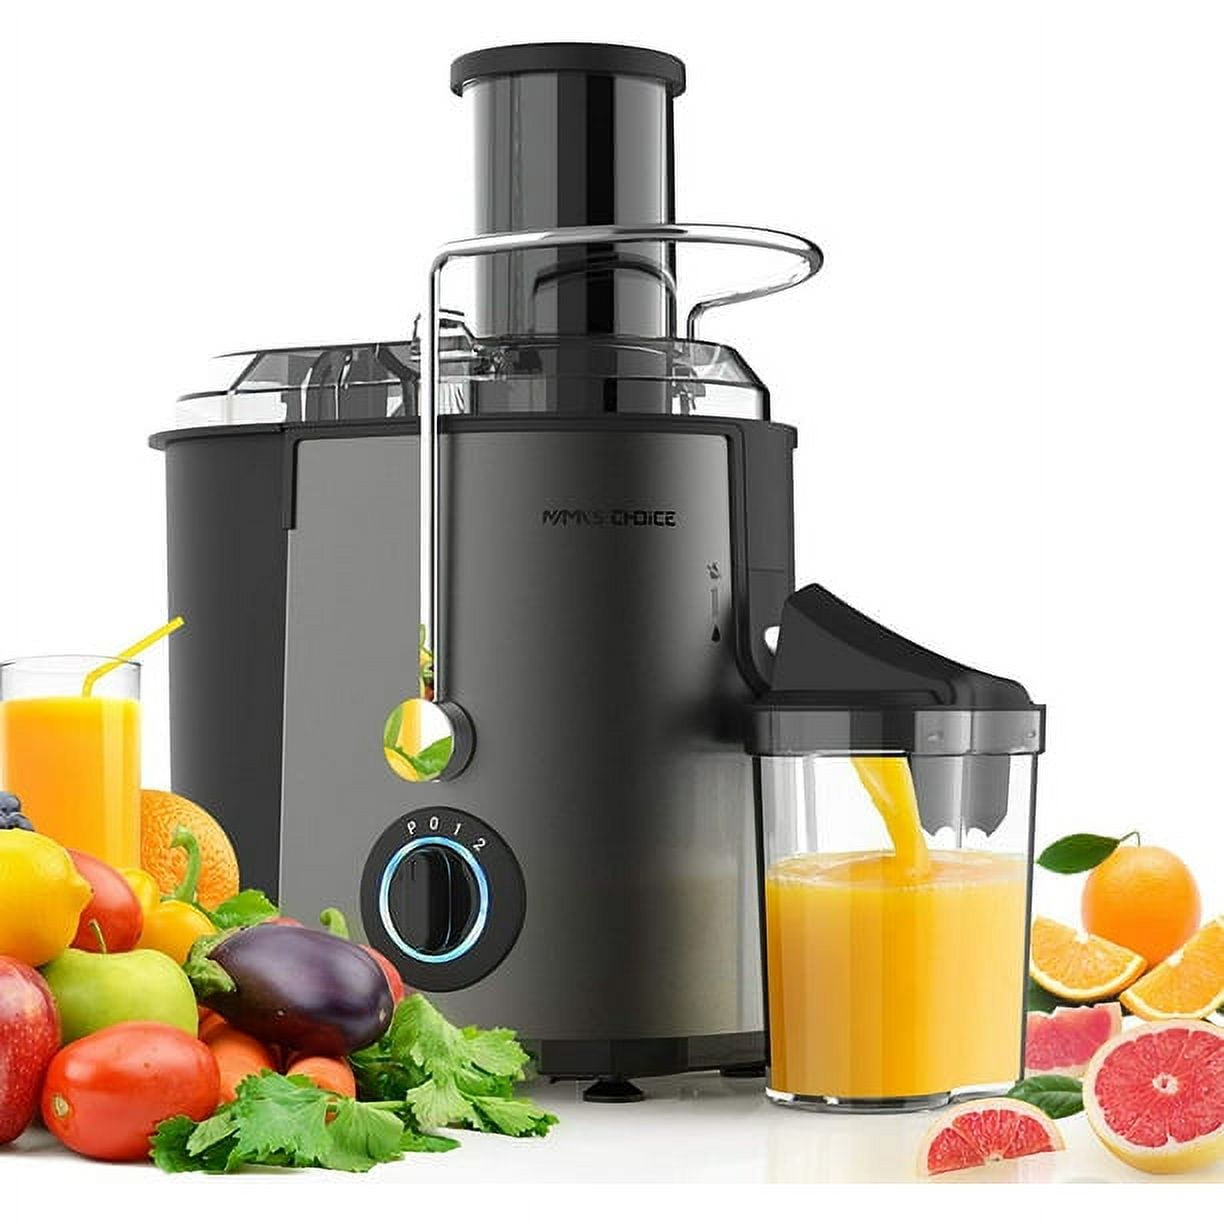 GCP Products GCP-US-577647 Juicer, 800W Centrifugal Juicer Machine